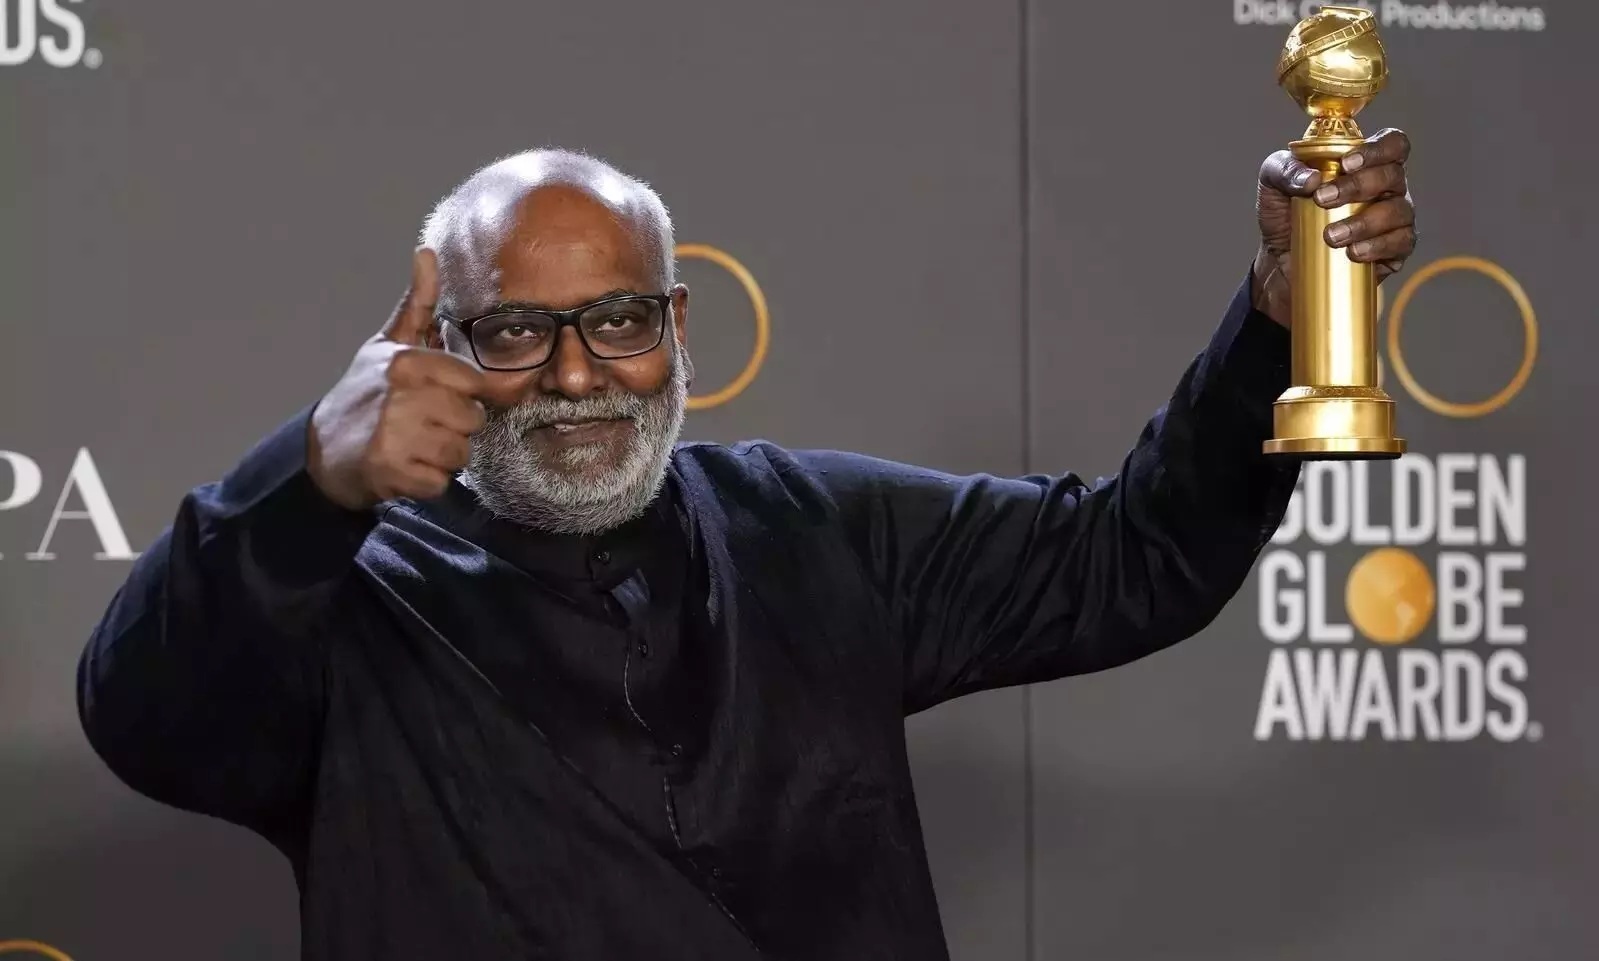 M.M. Keeravani, Composer of RRR, to be Honored at Variety Artisans Awards Alongside Other Talented Artists